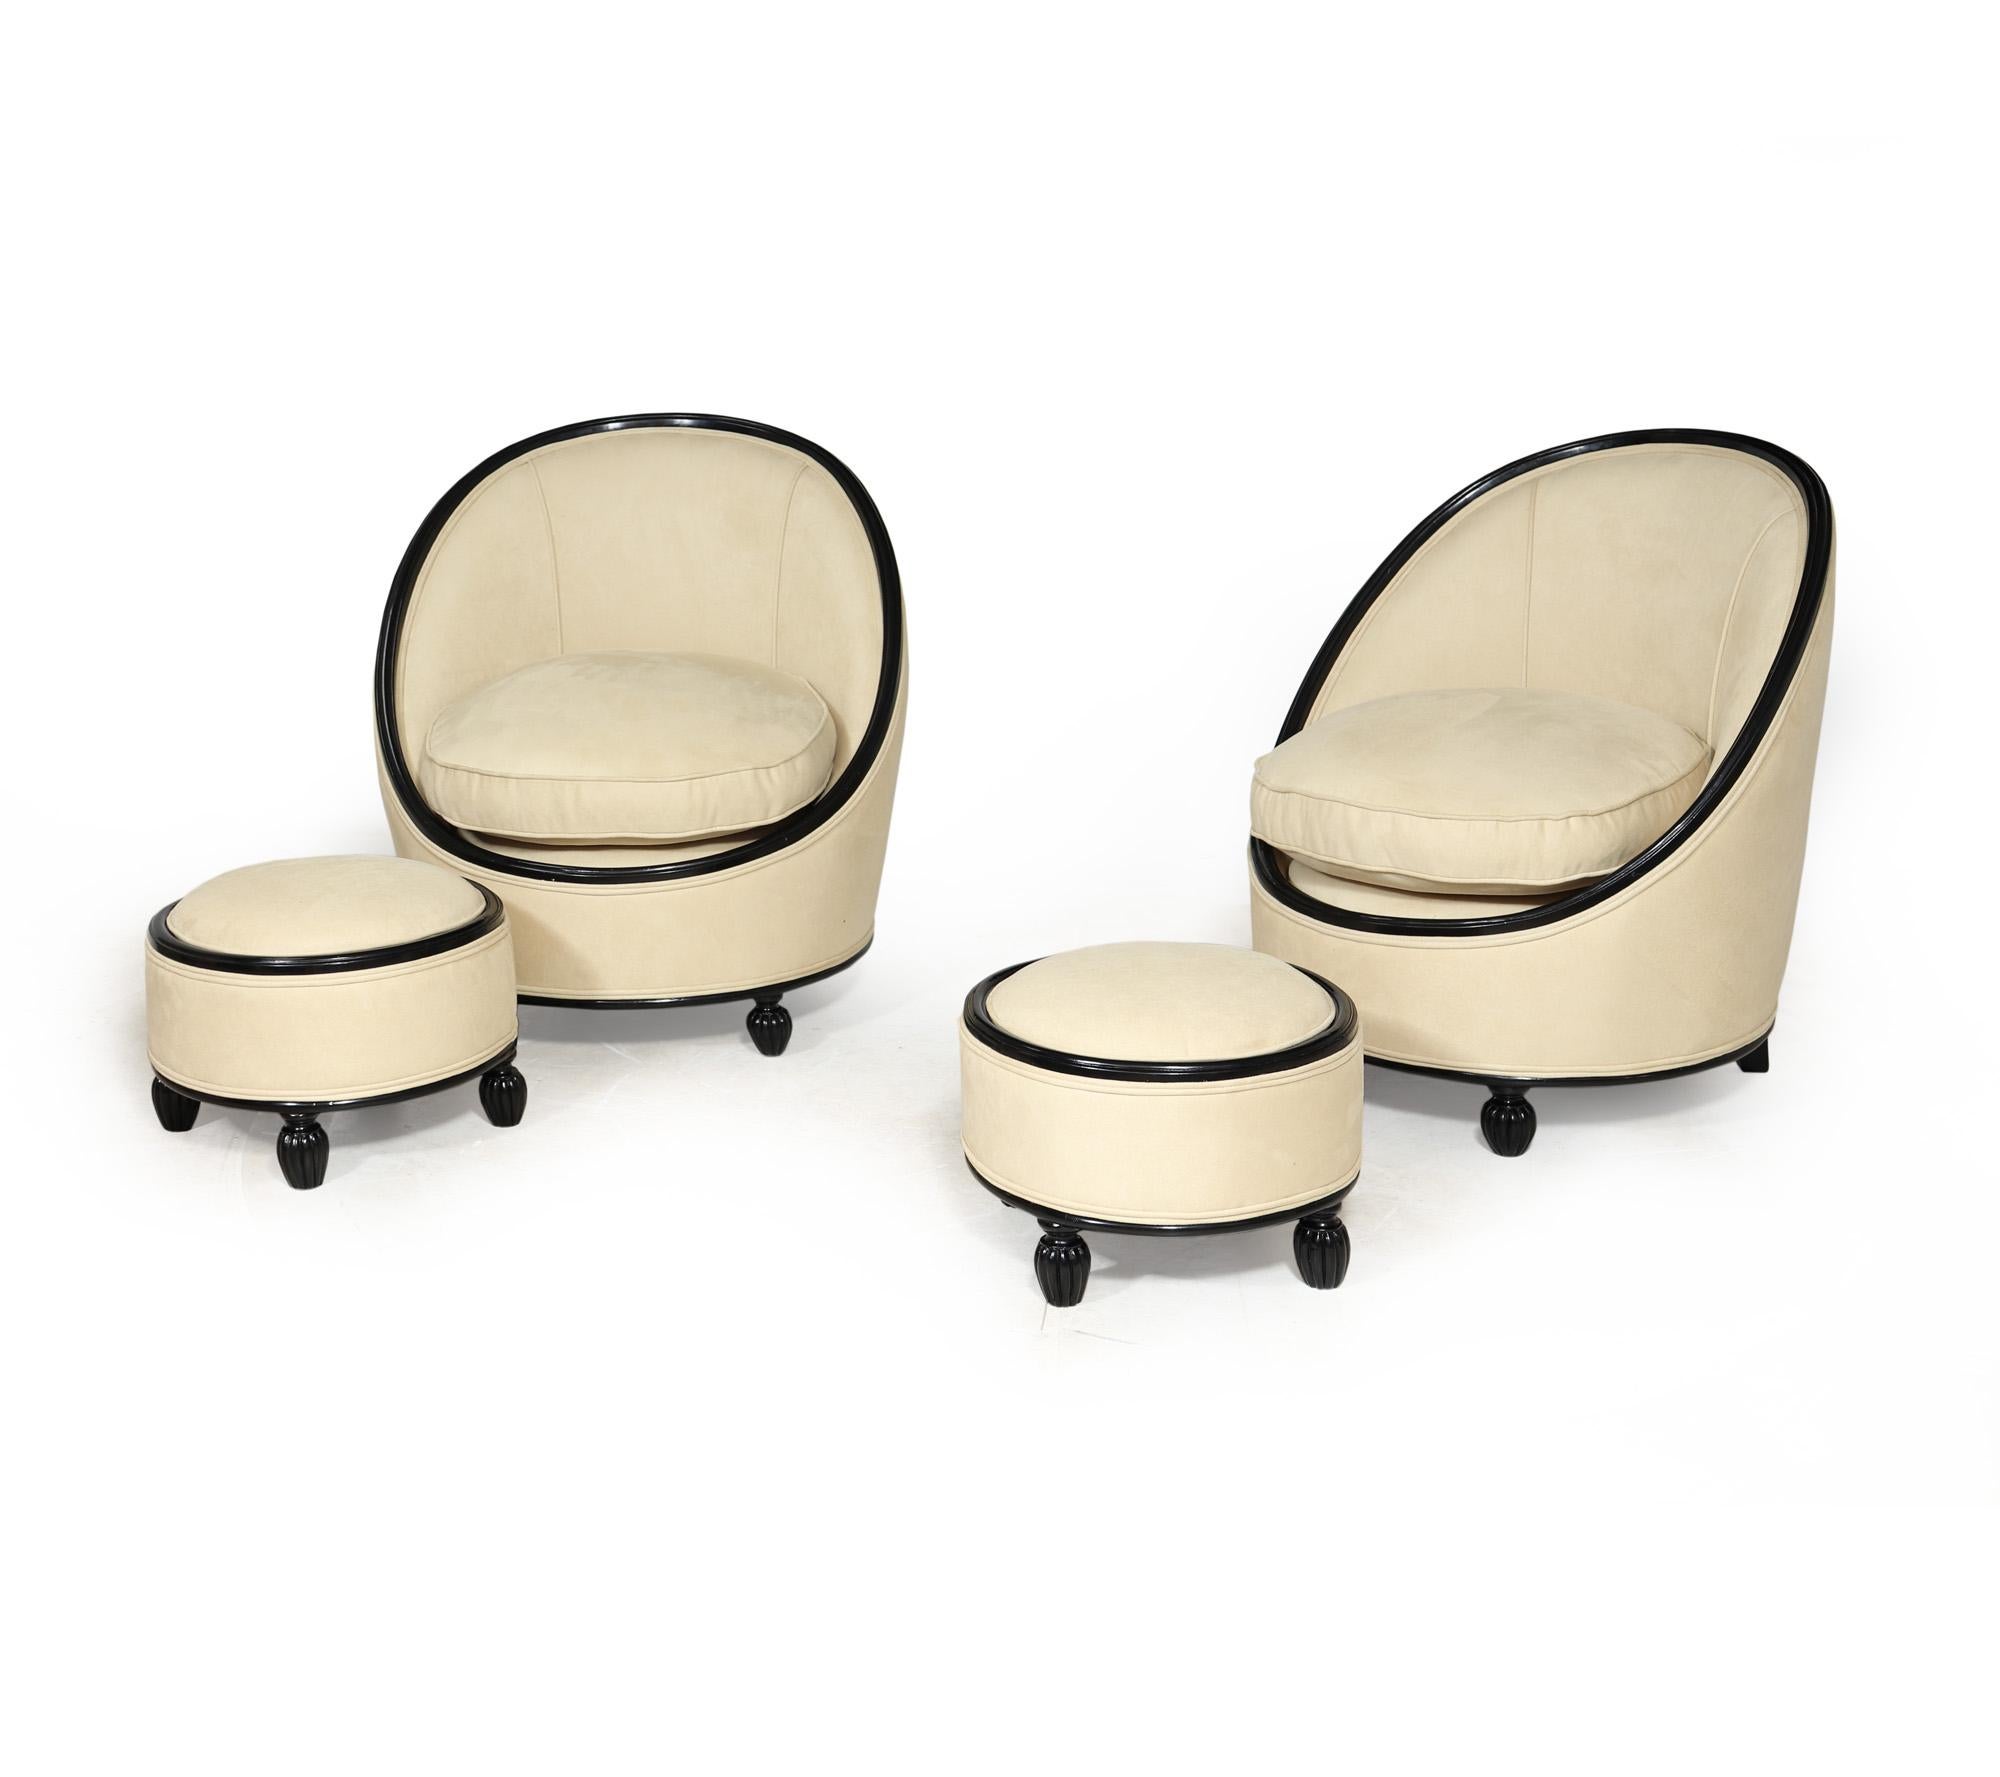 French Art Deco Salon Chairs Manner of Ruhlman c1925 For Sale